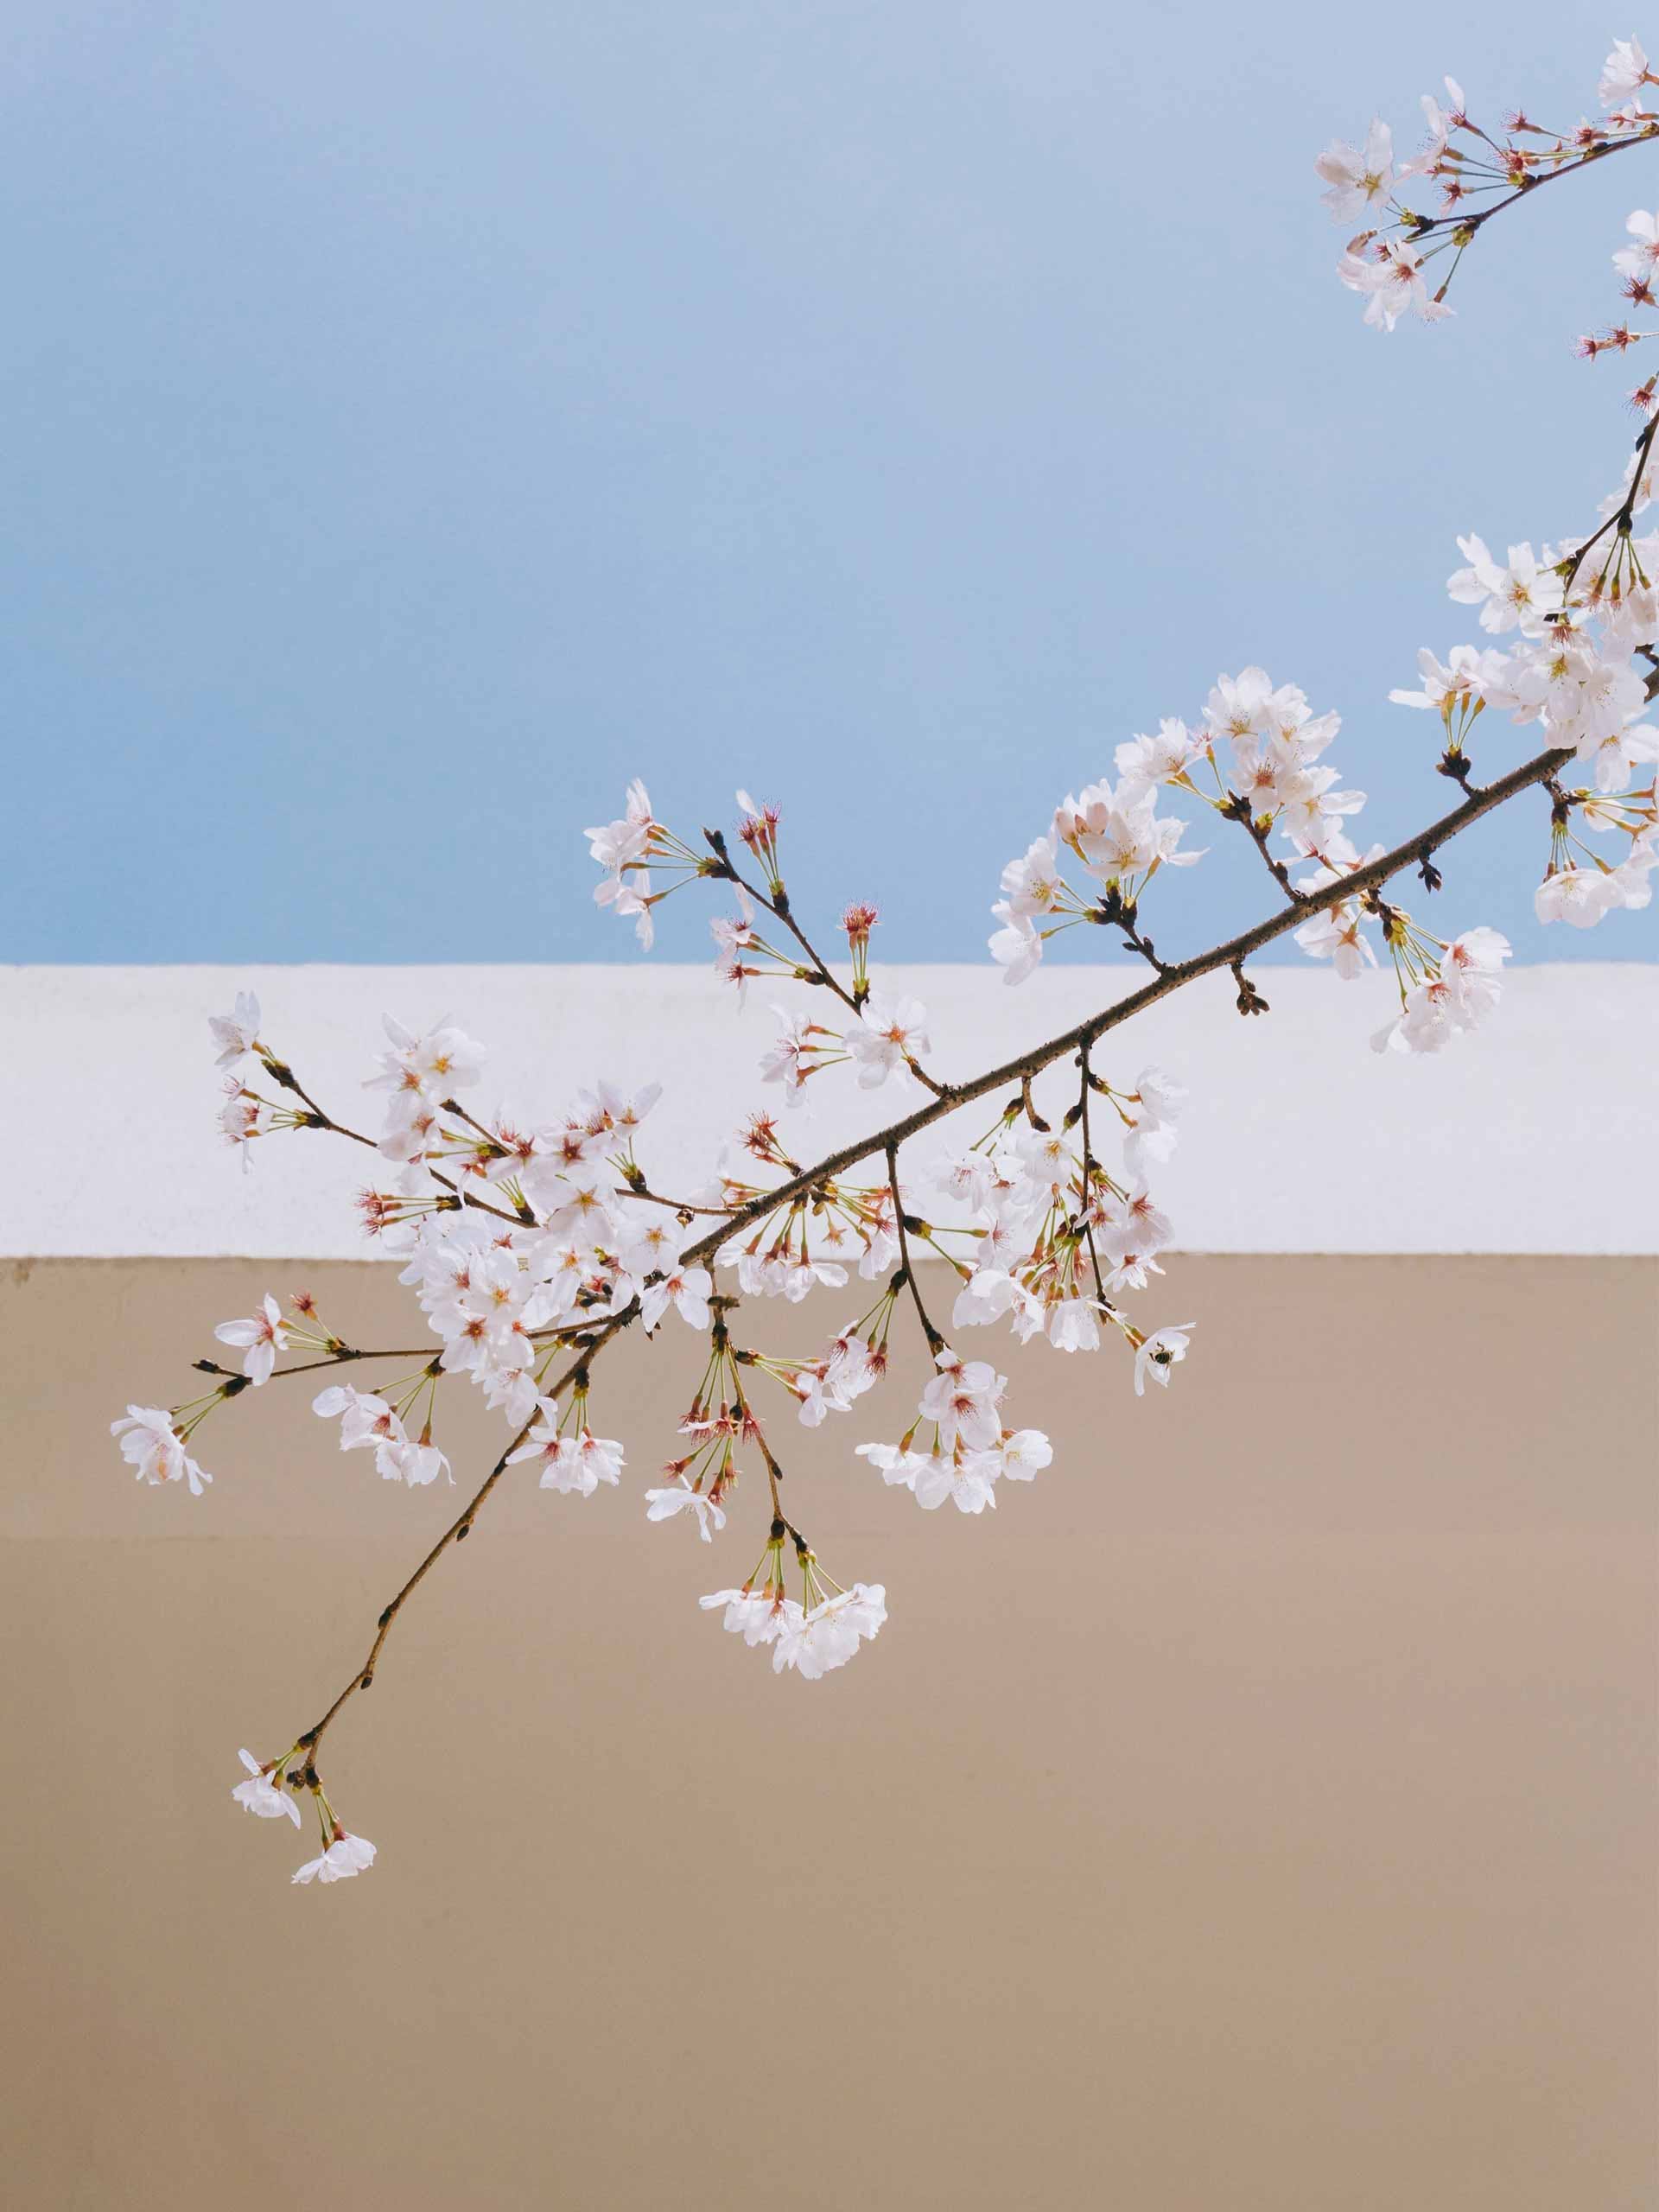 A branch of cherry blossoms in front of a wall - Cherry blossom